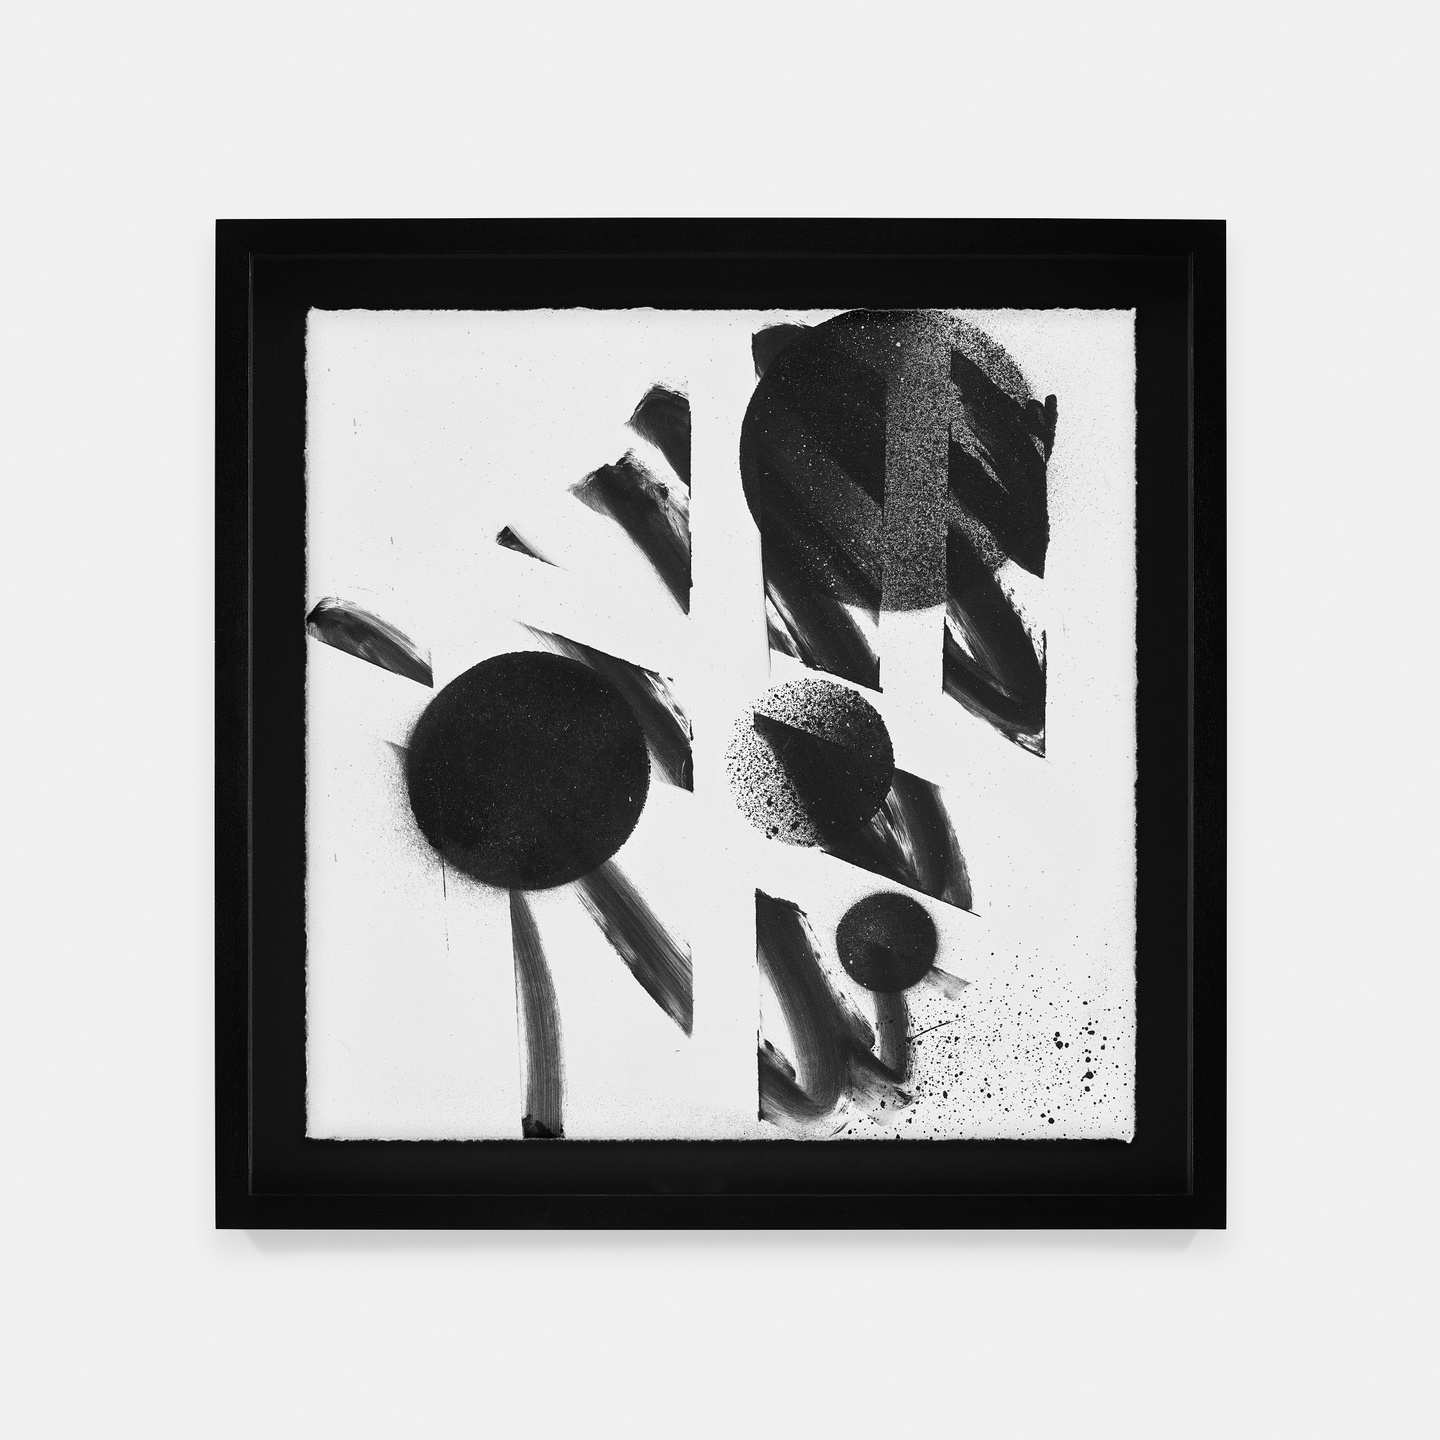 A black-and-white abstract composition featuring spray-painted circles seemingly under a grid stencil